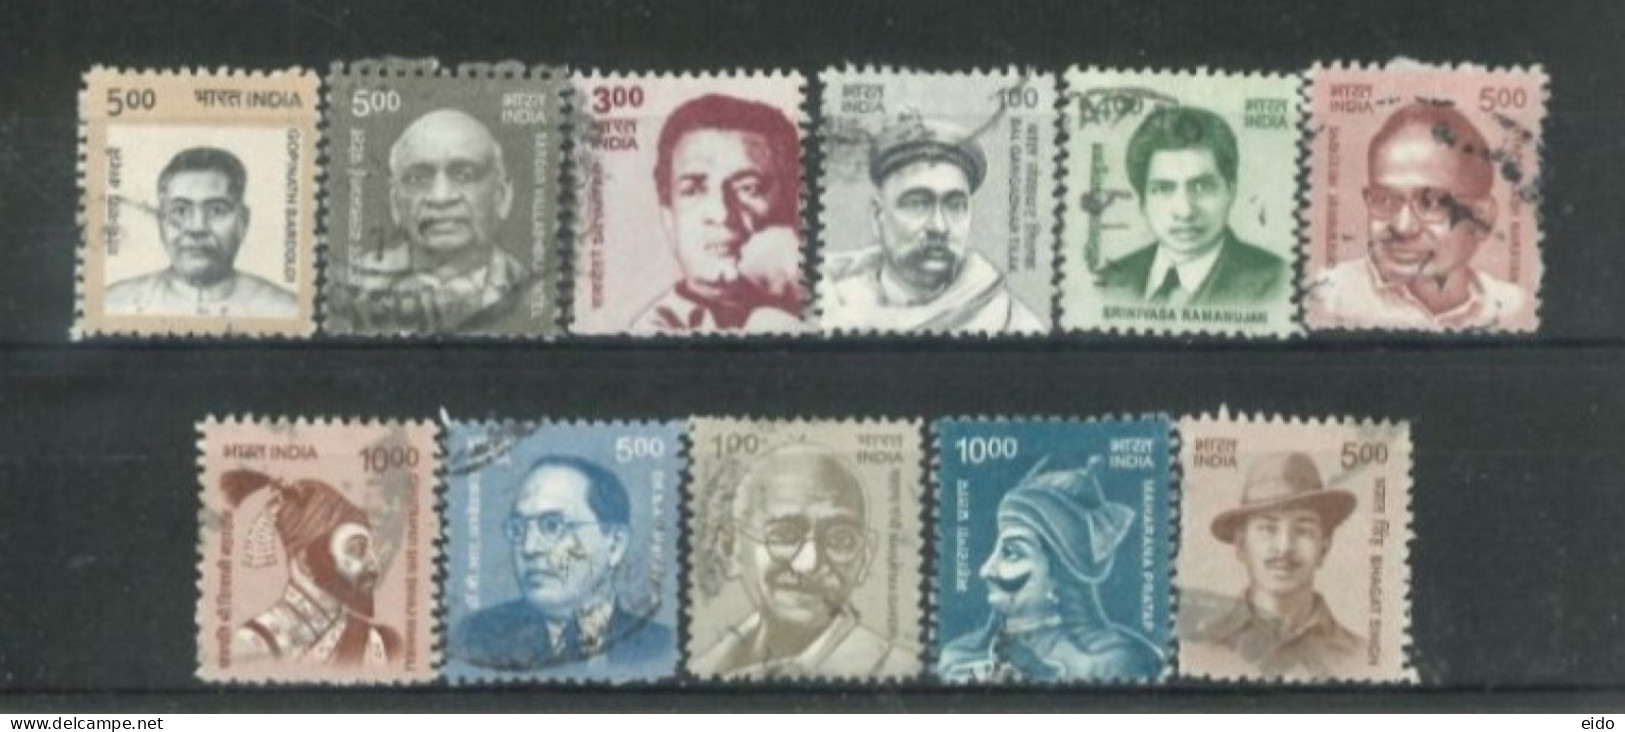 INDIA  - SELECTION OF INDIAN DEFINITIVE STAMPS, USED. - Gebruikt